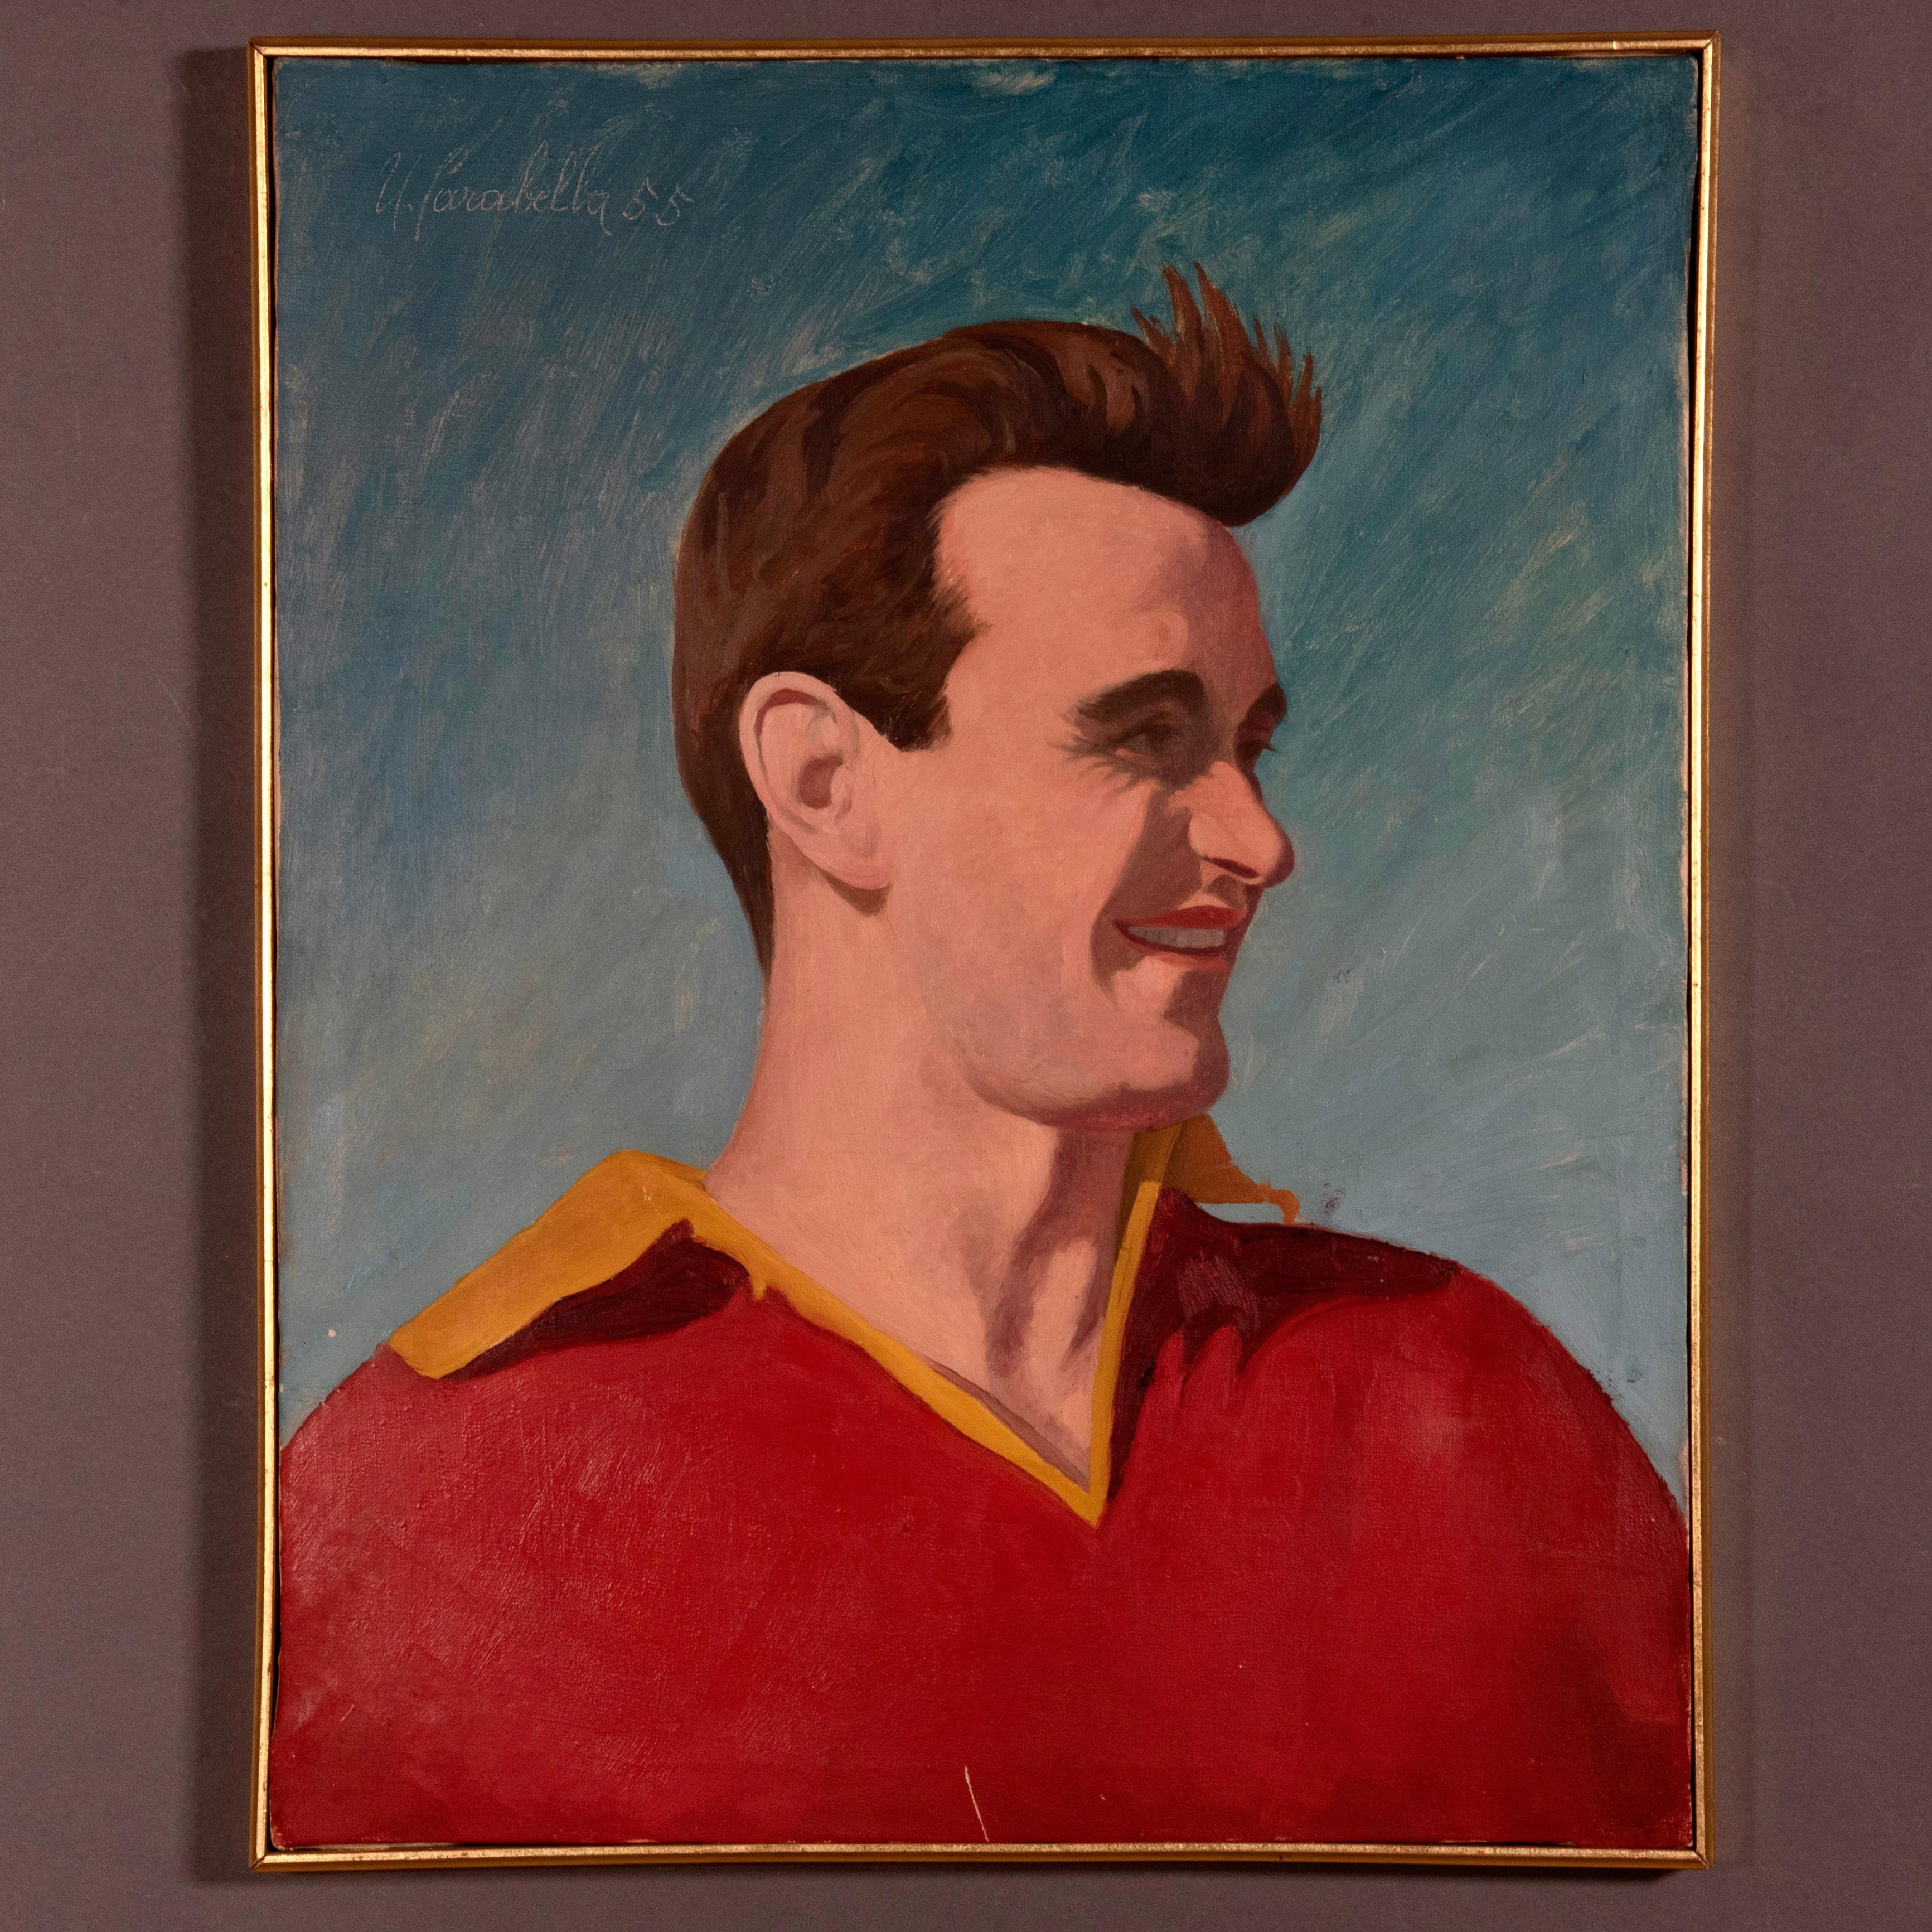 Really impressive oil on canvas painting by the great modern Italian artist Umberto Carabella (Paliano, Frosinone 1912-1956).
This is an intense portrait of the great football player Giancarlo 'Carlo' Galli, known as 'Testina d'oro' (Golden Head)